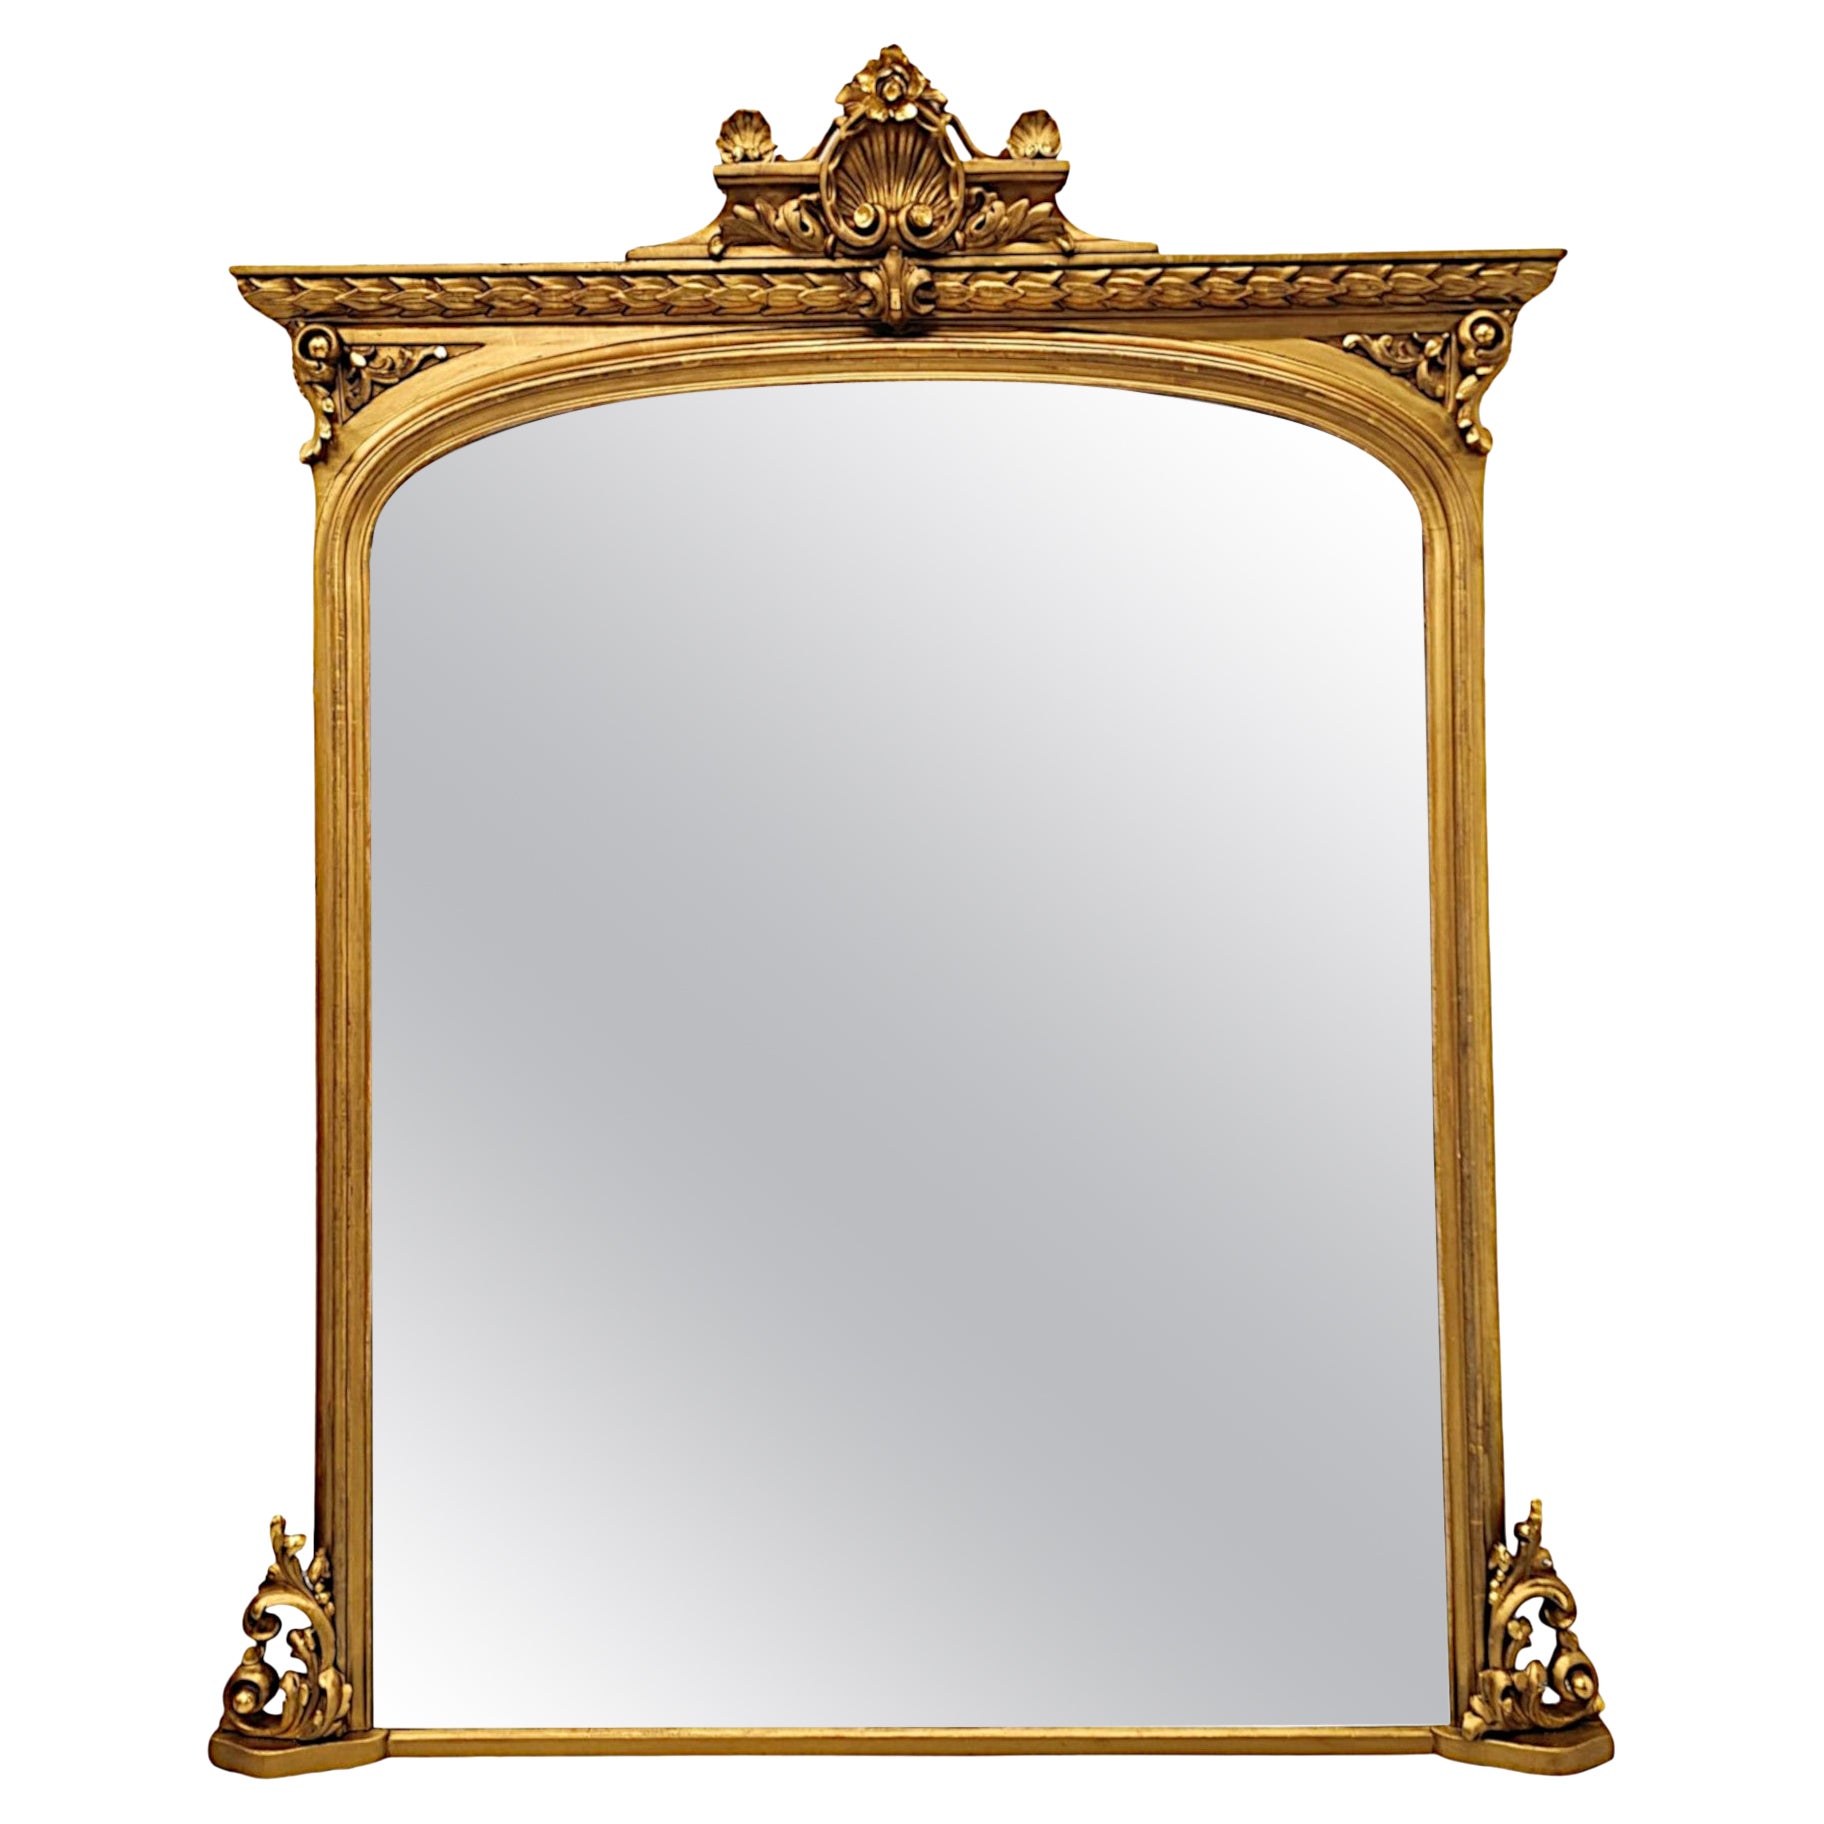  A Fabulous Large 19th Century Giltwood Overmantel Mirror For Sale